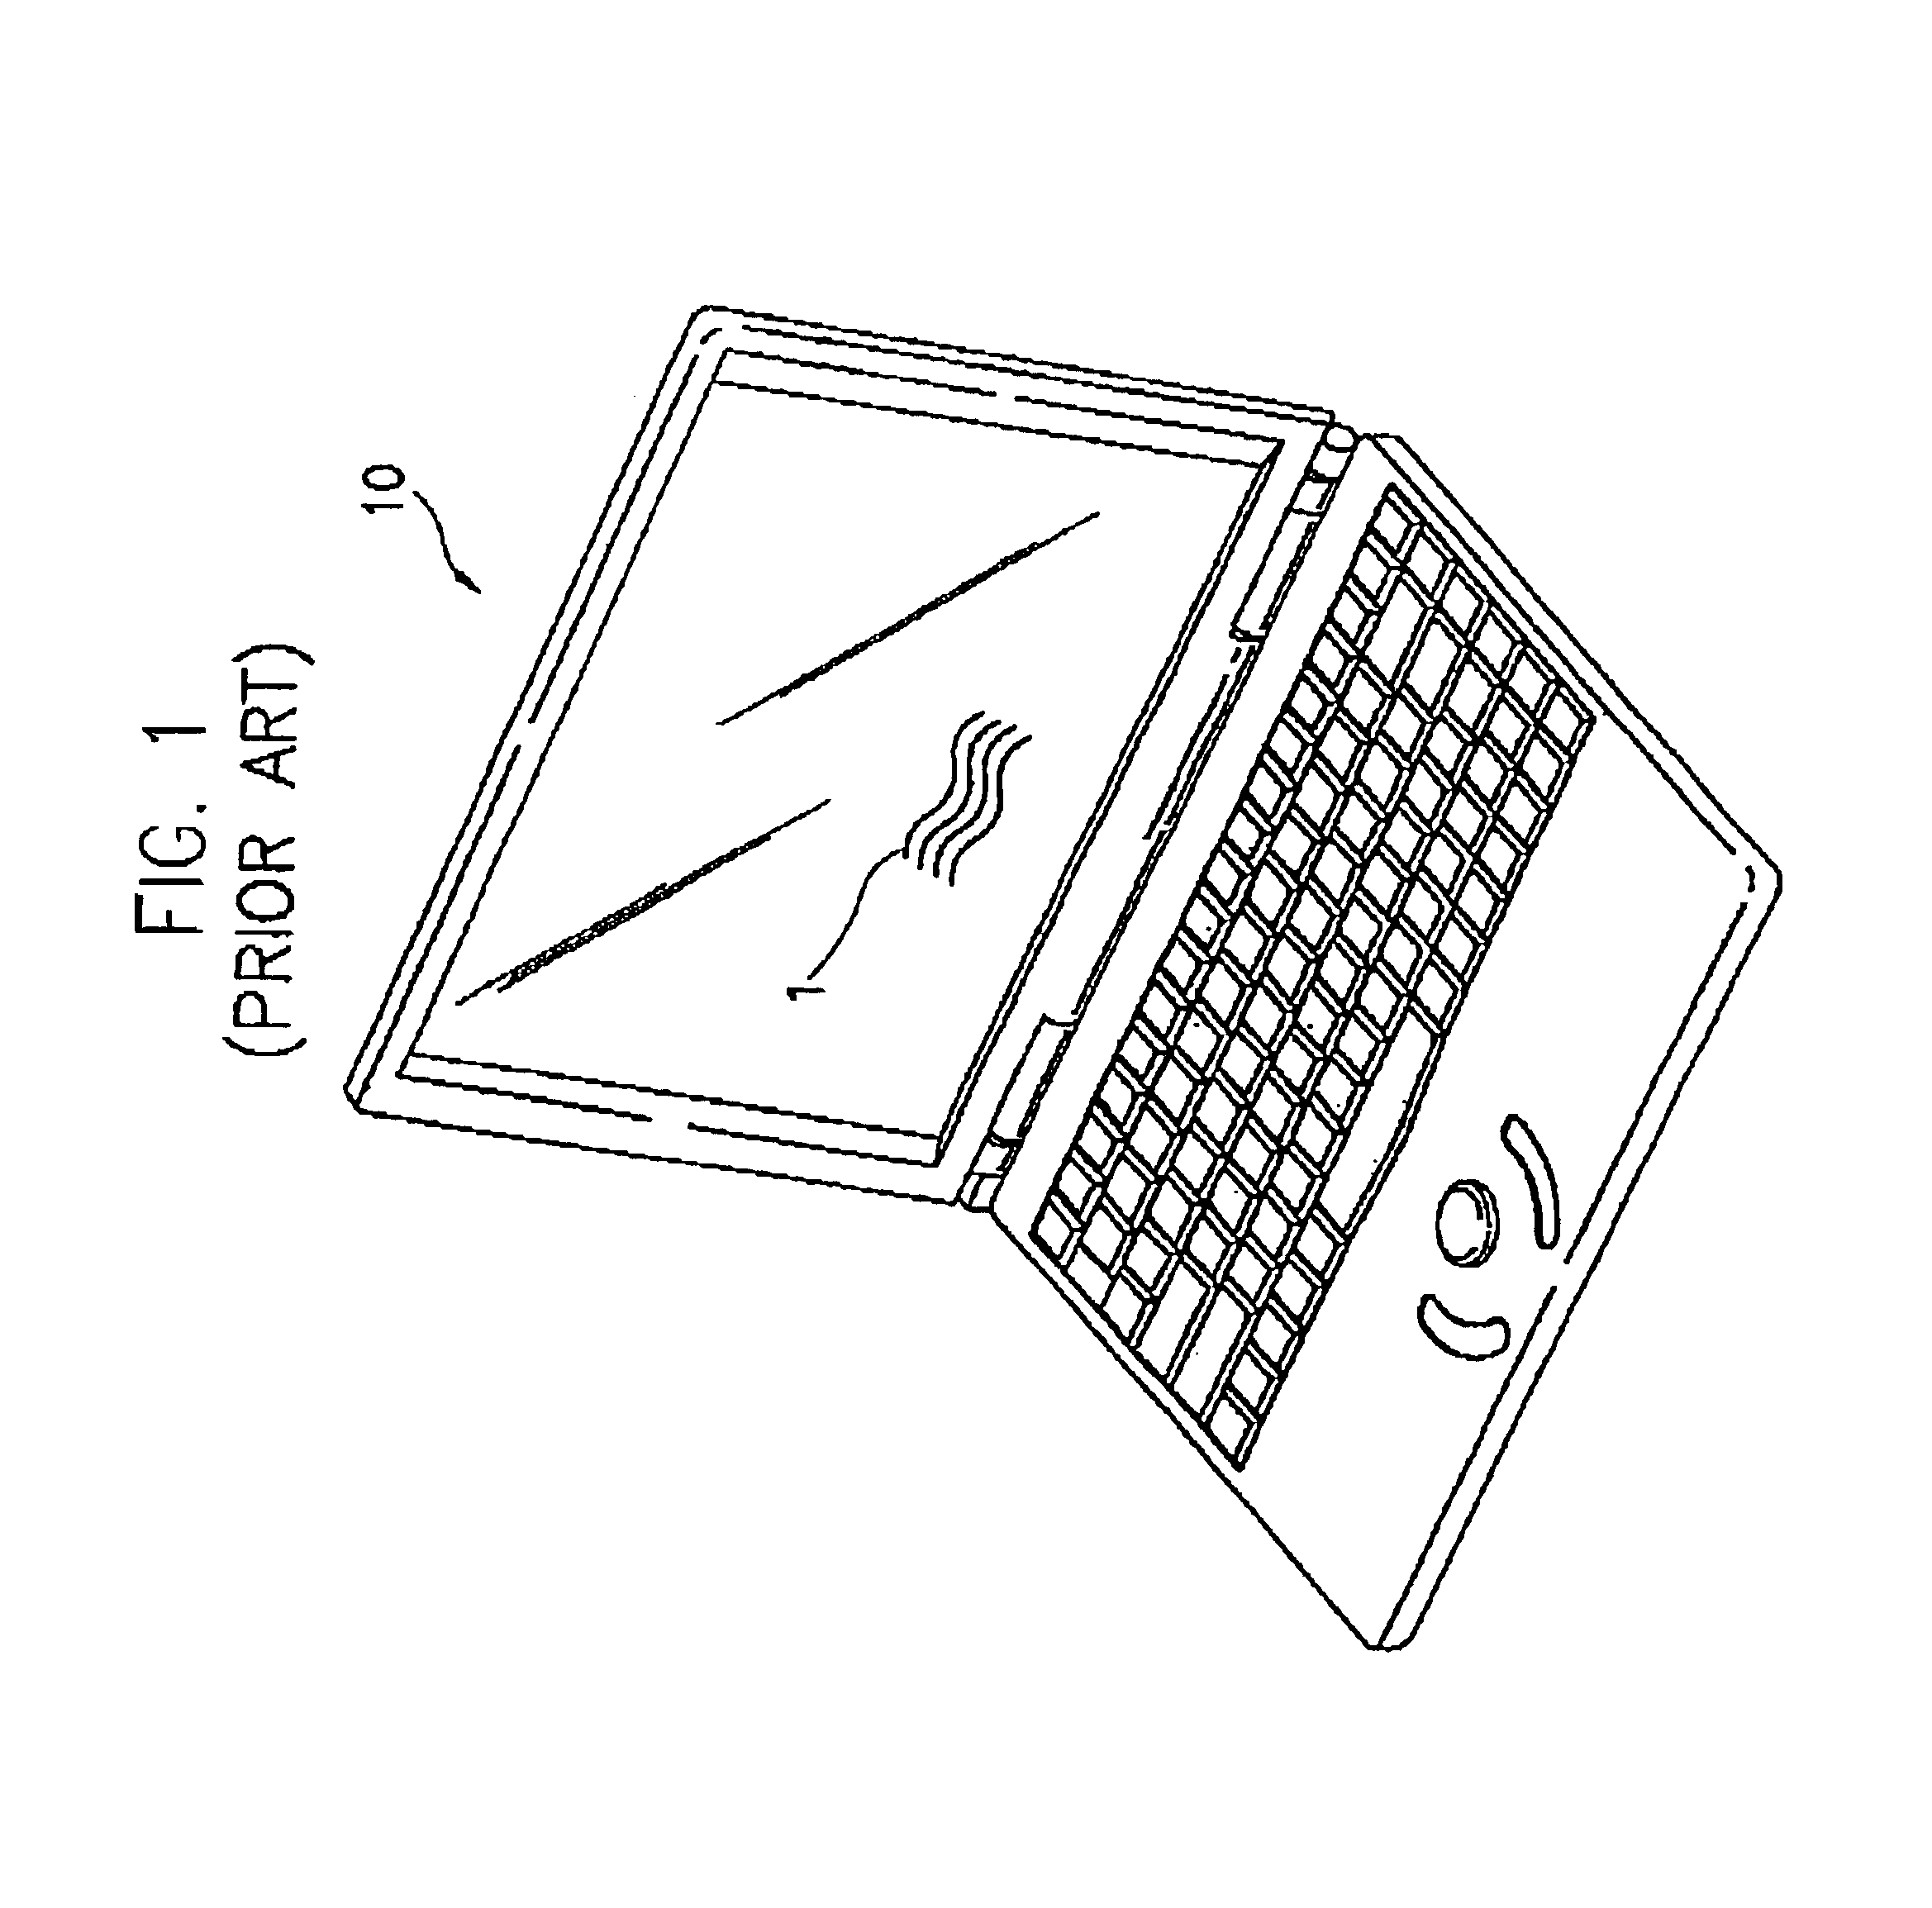 Liquid crystal display with a heat shield between the inverter and the backlight assembly